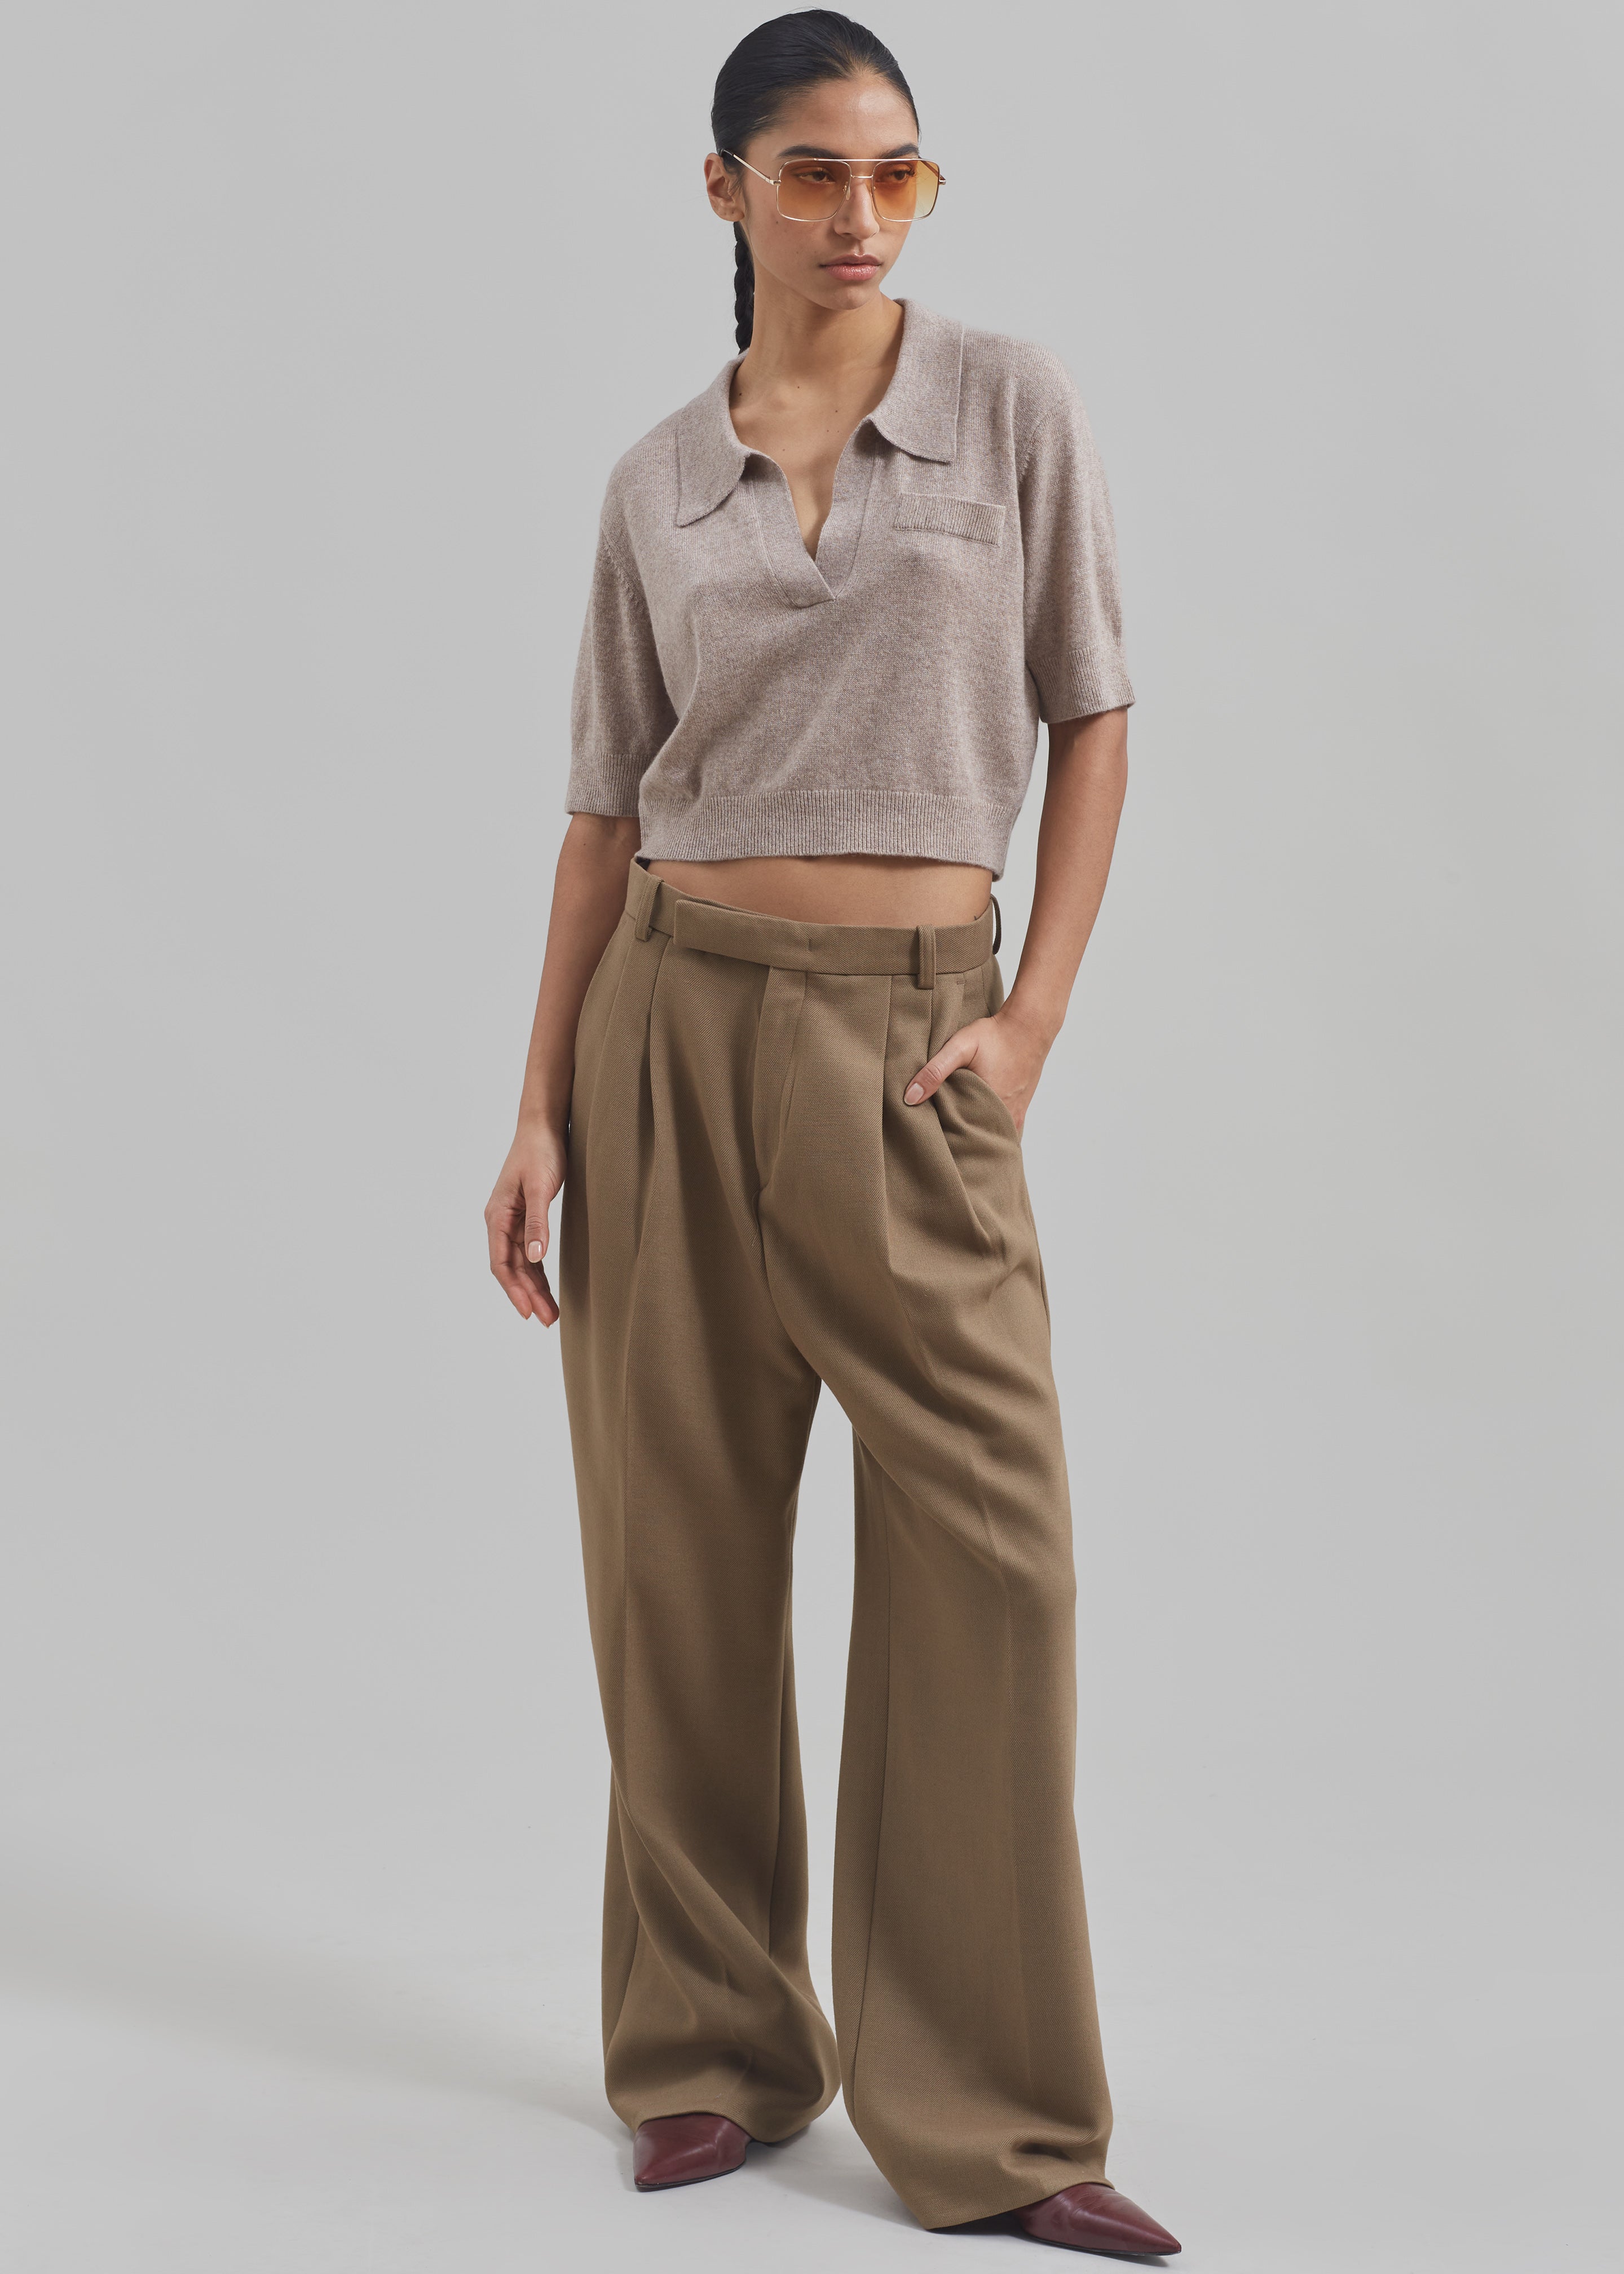 The Garment Piemonte Cropped Sweater - Toast - 6